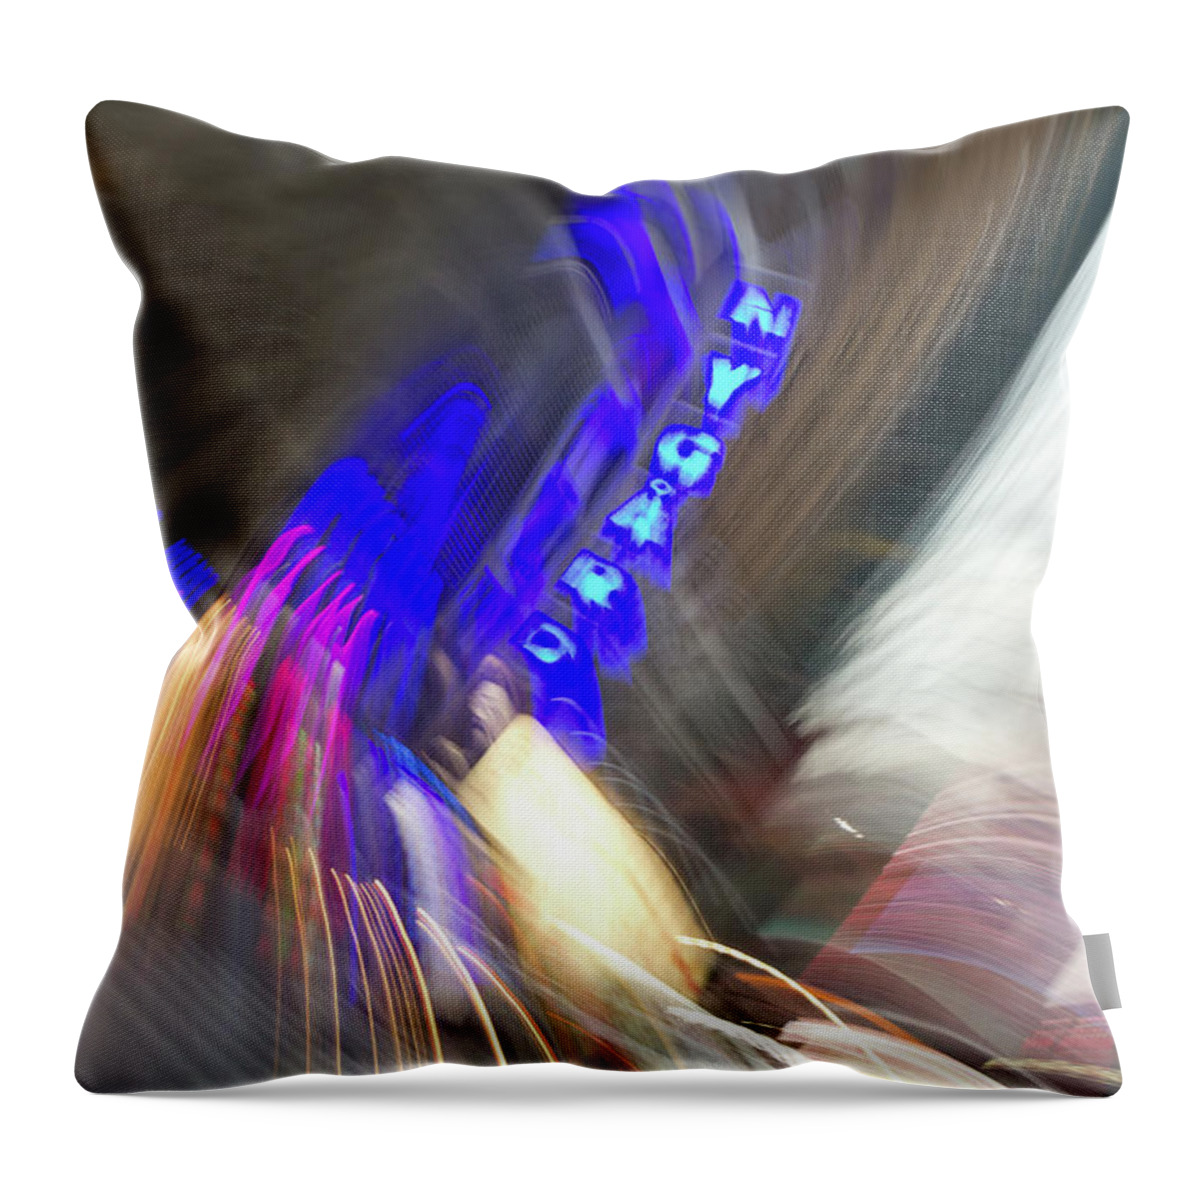 Pattern Throw Pillow featuring the photograph Manhattan Twist by Kyle Lee